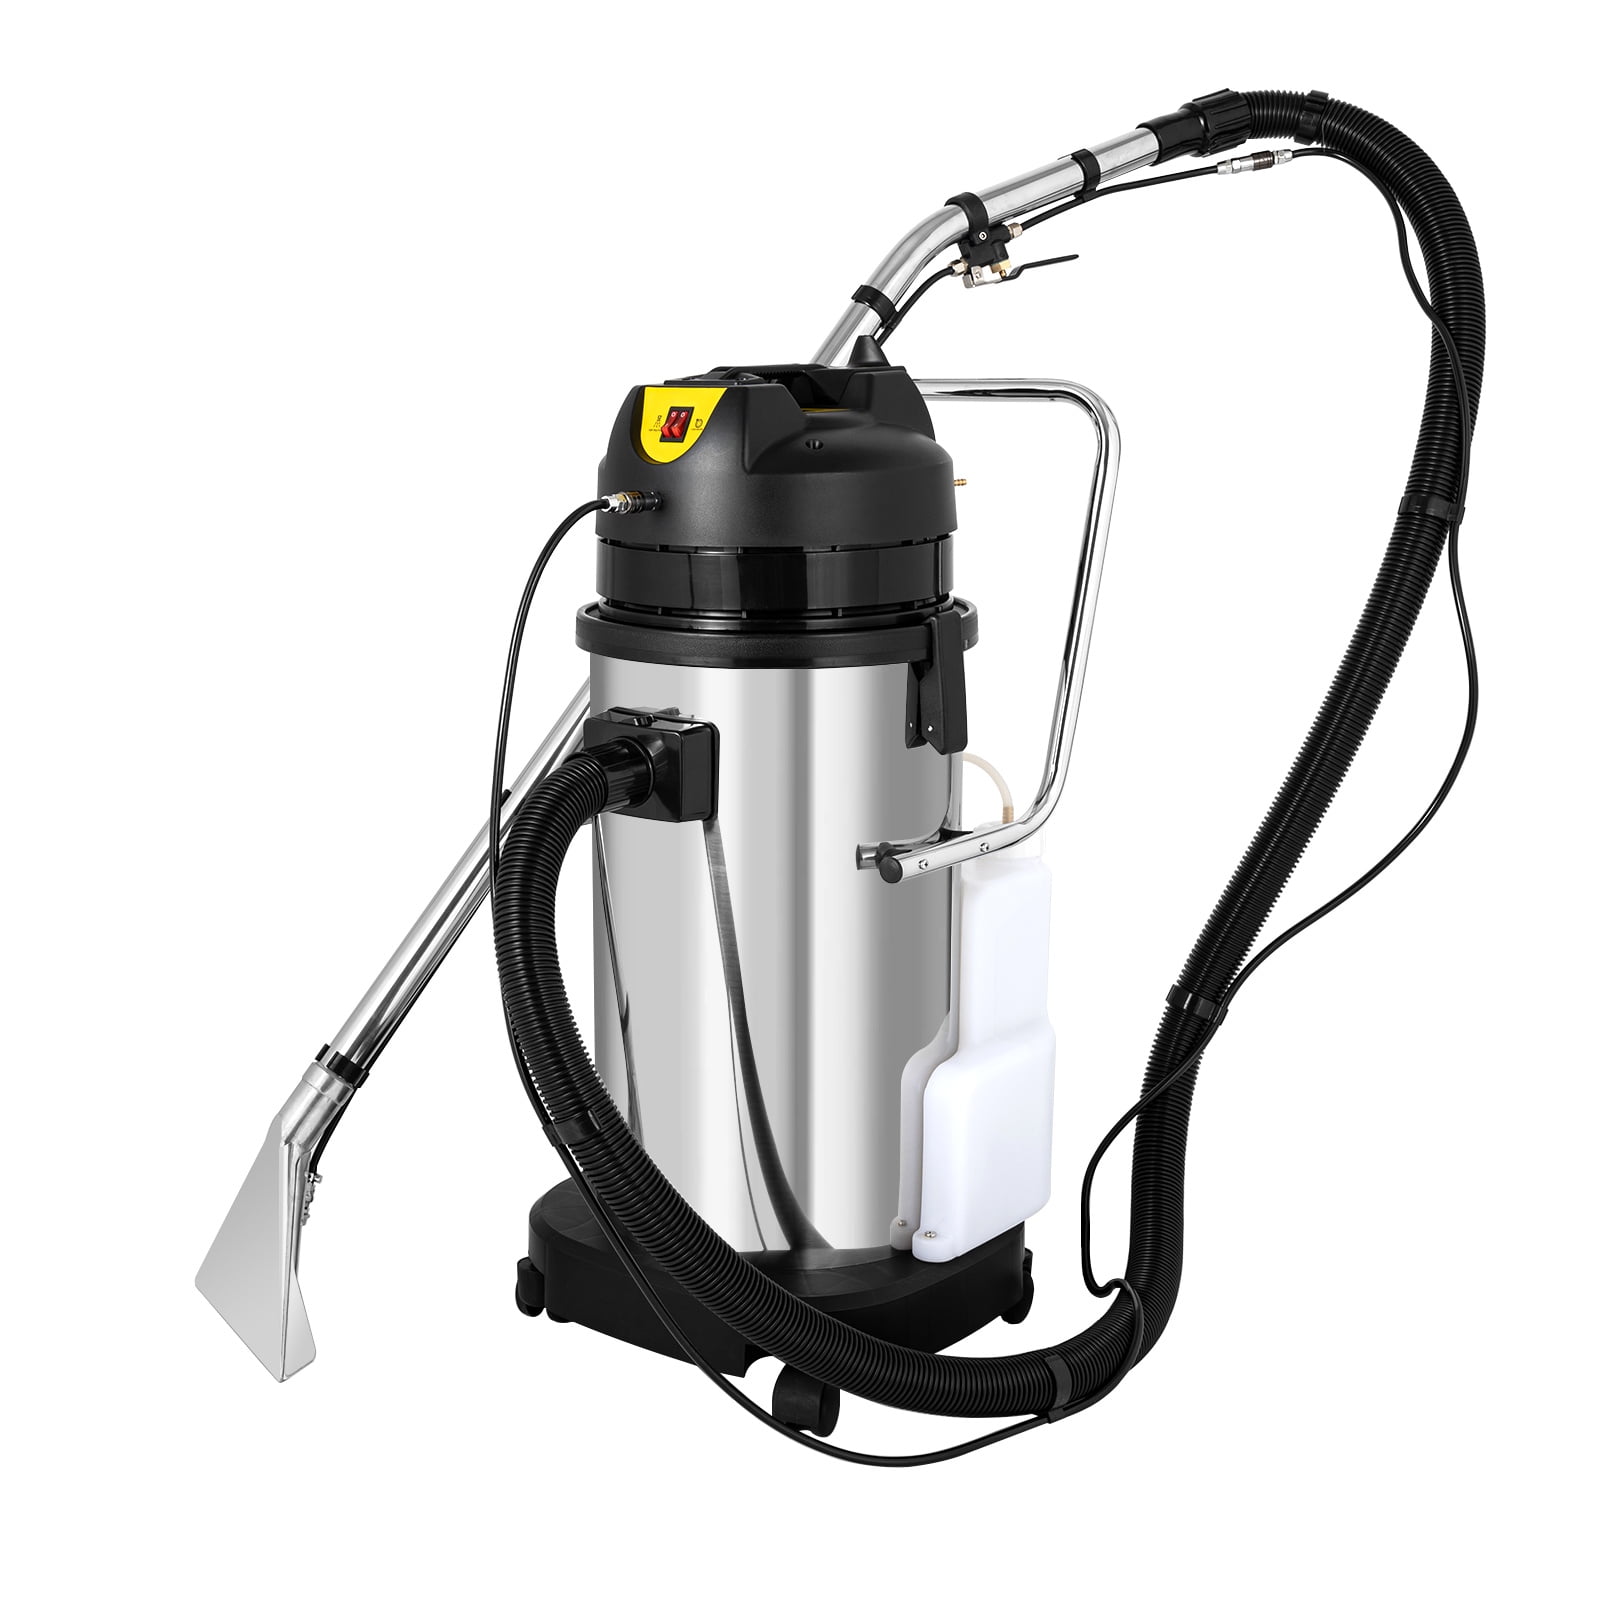 Commercial Carpet Cleaning Machine 40L/10.5Gal Carpet Cleaner Machine,  1034W 3 in 1 Portable Stainless Steel Carpet Extractor, Heavy Duty Dust